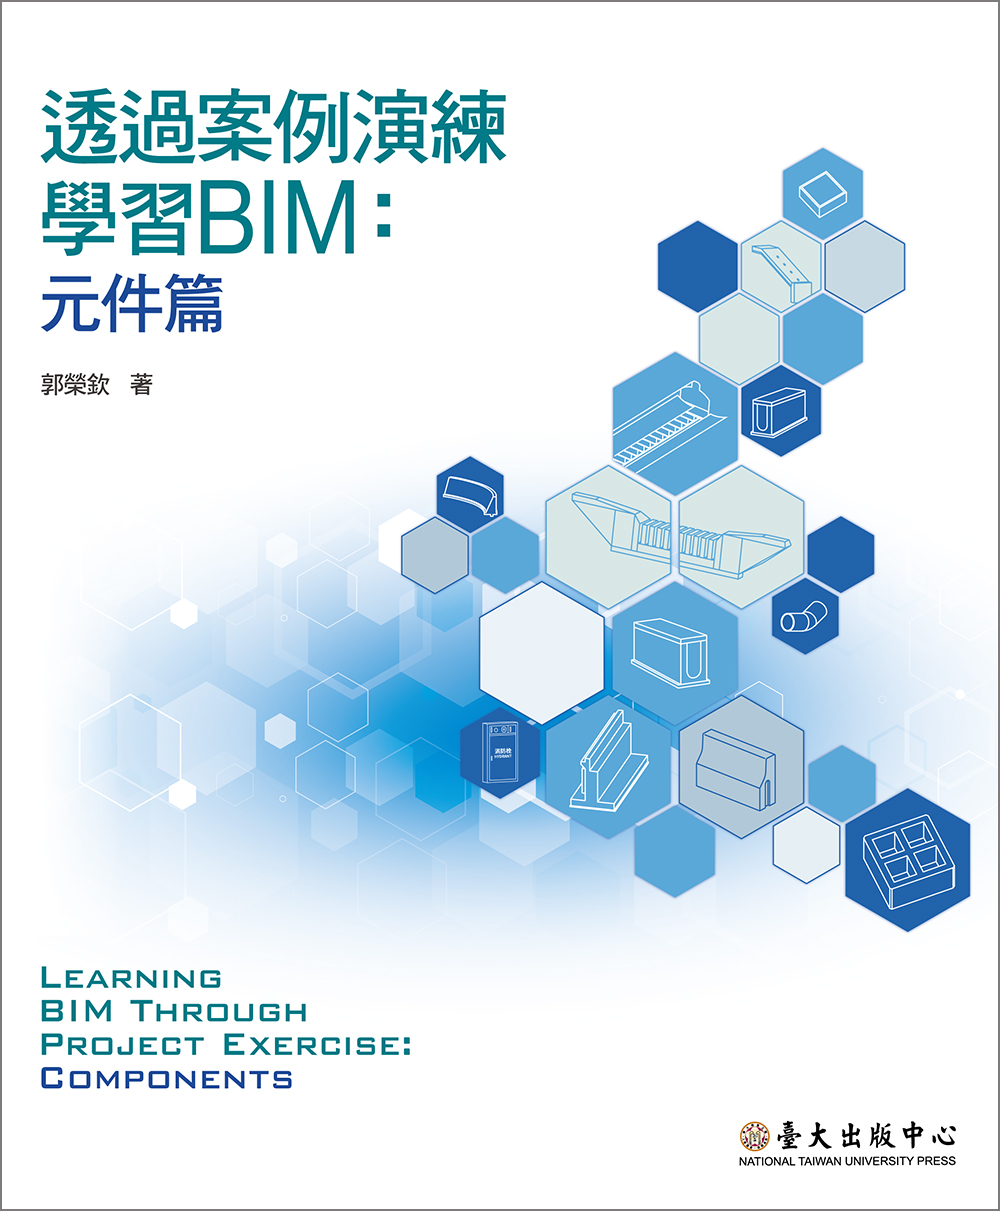 Learning BIM Through Project Exercise: Components